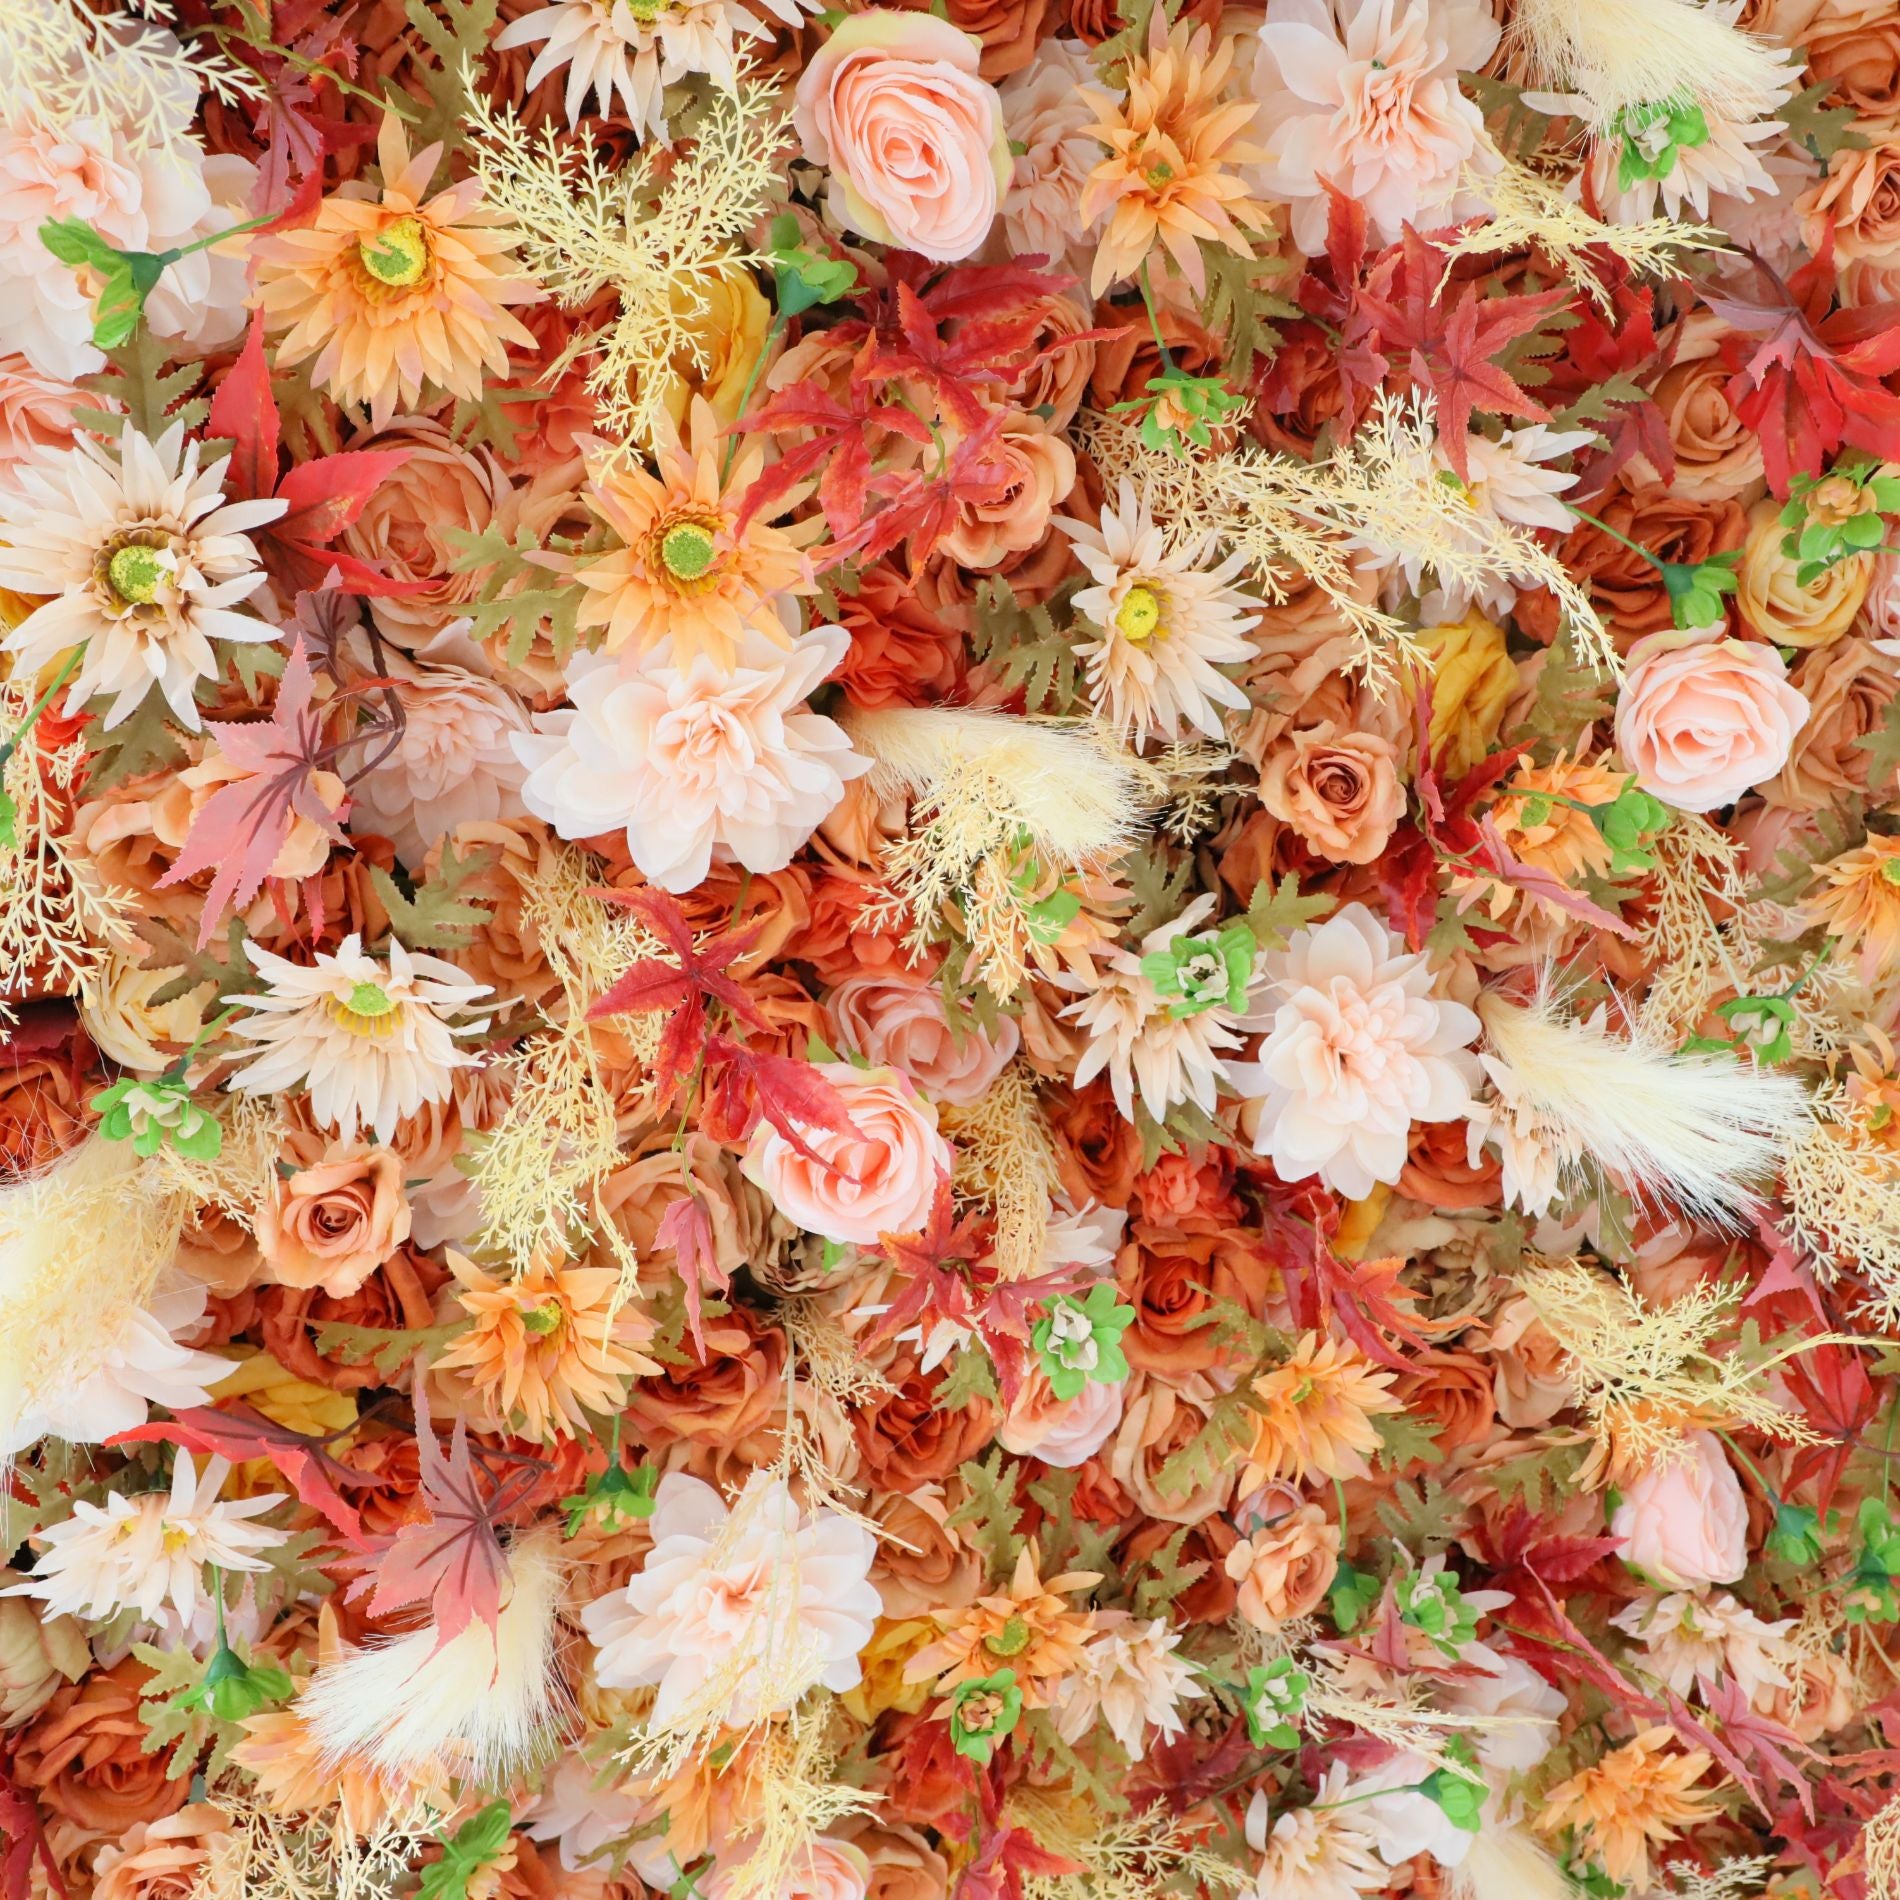 The fall orange flower wall's detailed view shows off vivid colors and a realistic fabric backing.